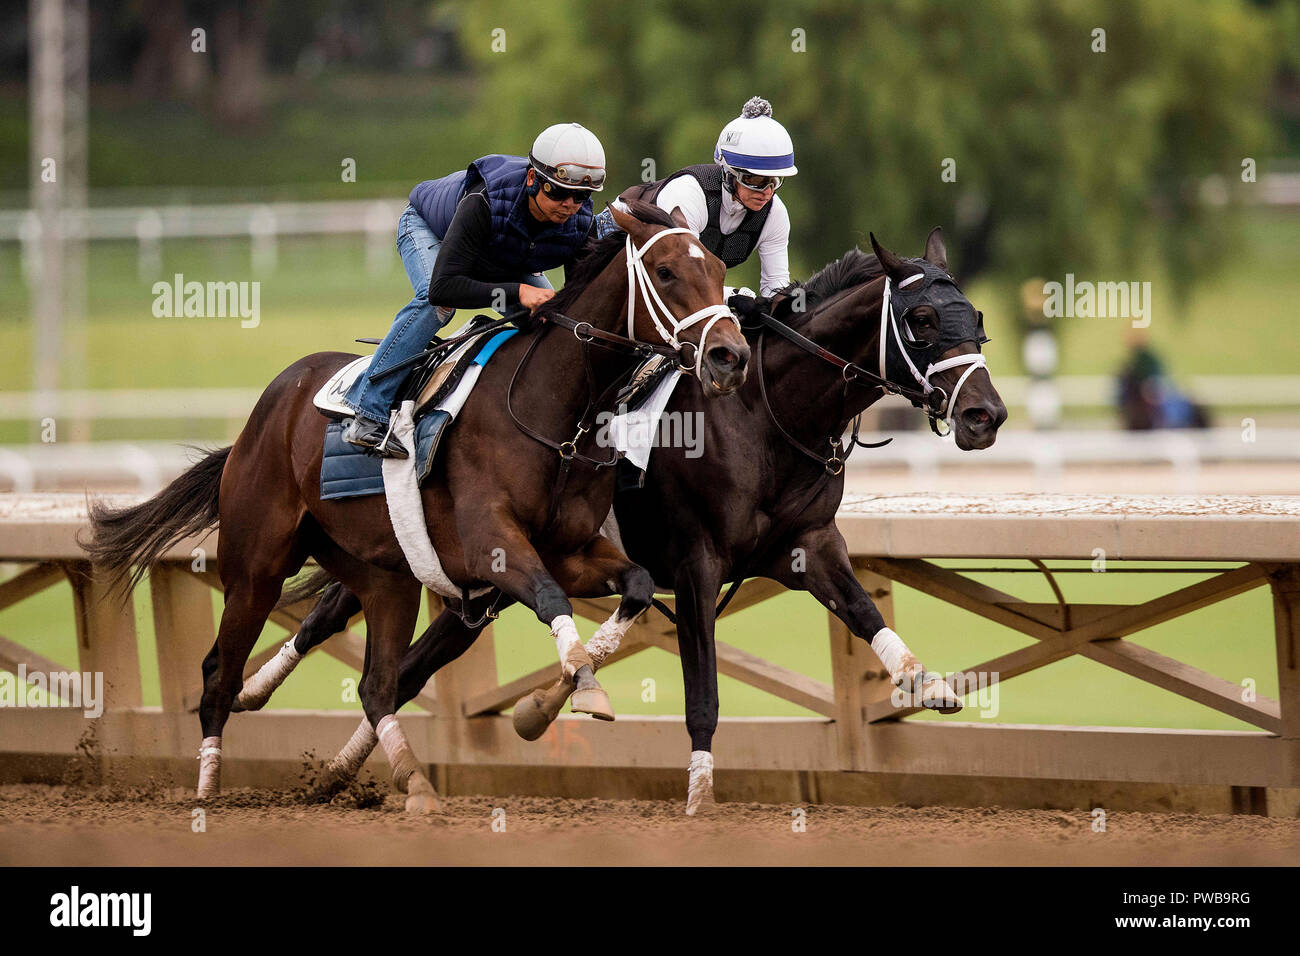 Arcadia, CA, USA. 14th Oct, 2018. October 14 2018 : Breeders' Cup Juvenile Flllies contender Vibrance (outside) works in company with Paved at Santa Anita Park on October 14, 2018 in Arcadia, California. Evers/ESW/CSM/Alamy Live News Stock Photo